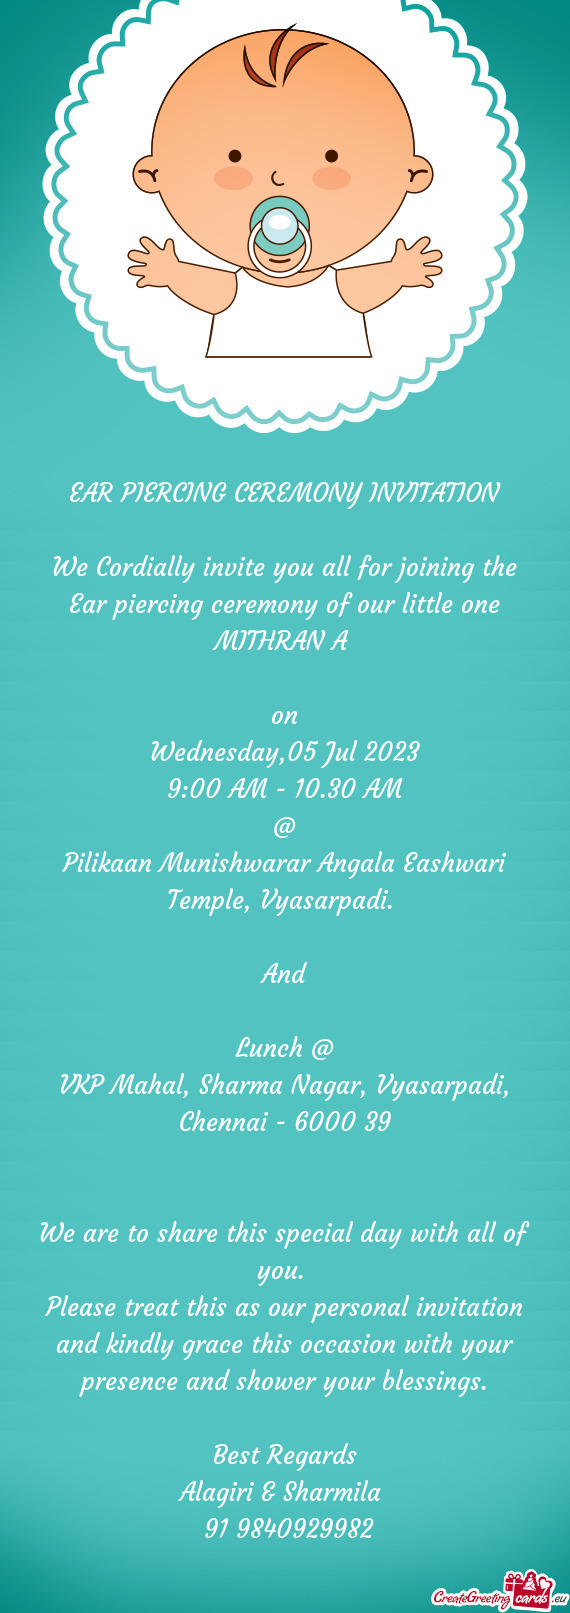 We Cordially invite you all for joining the Ear piercing ceremony of our little one MITHRAN A